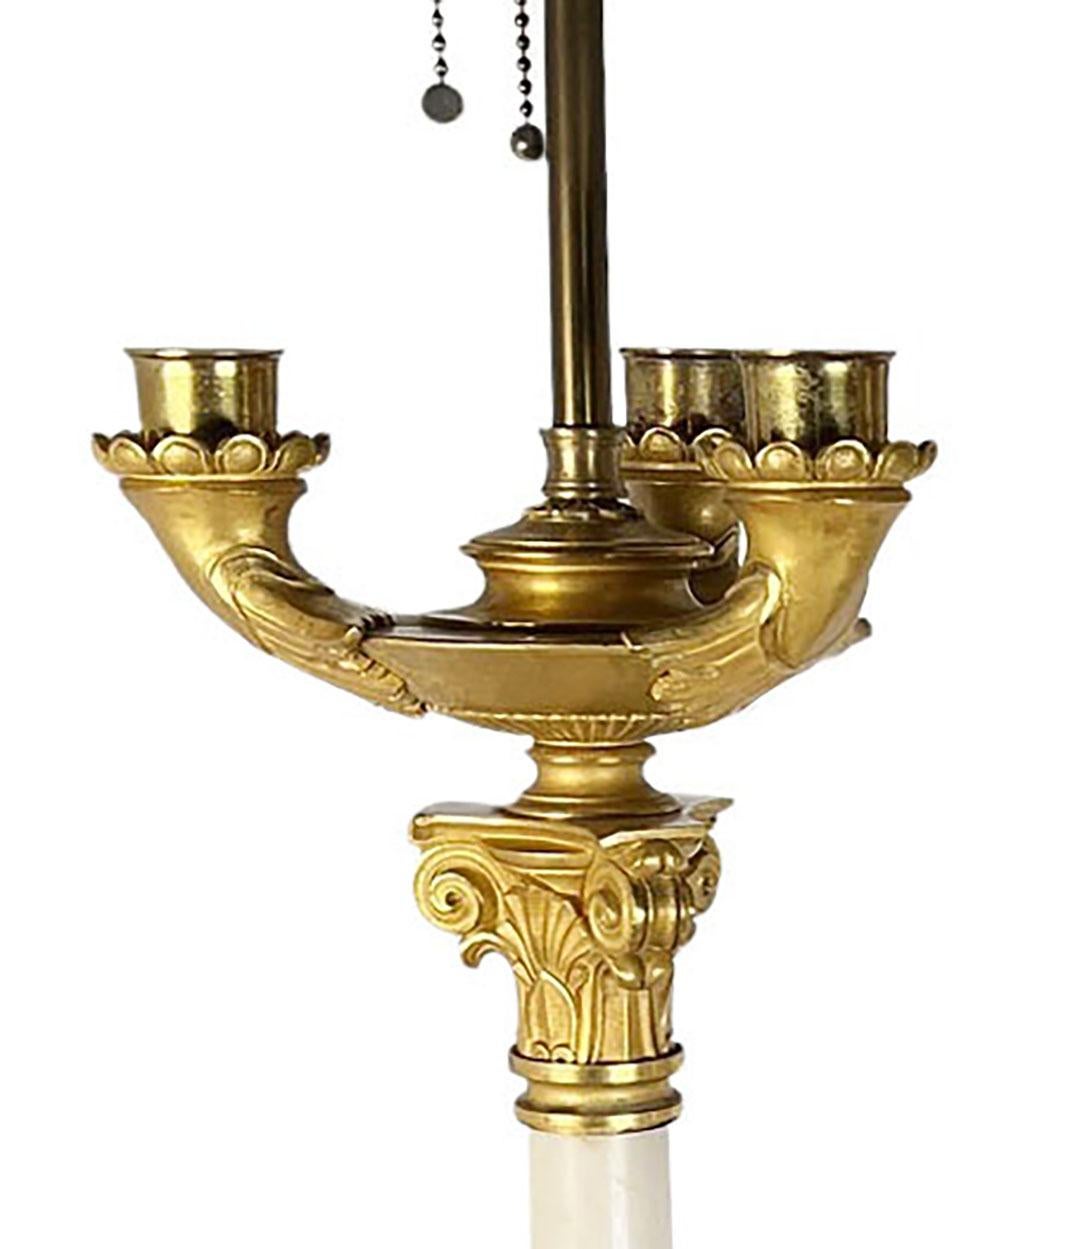 French Empire Style Carrera Marble And Bronze Dore Candelabra For Sale